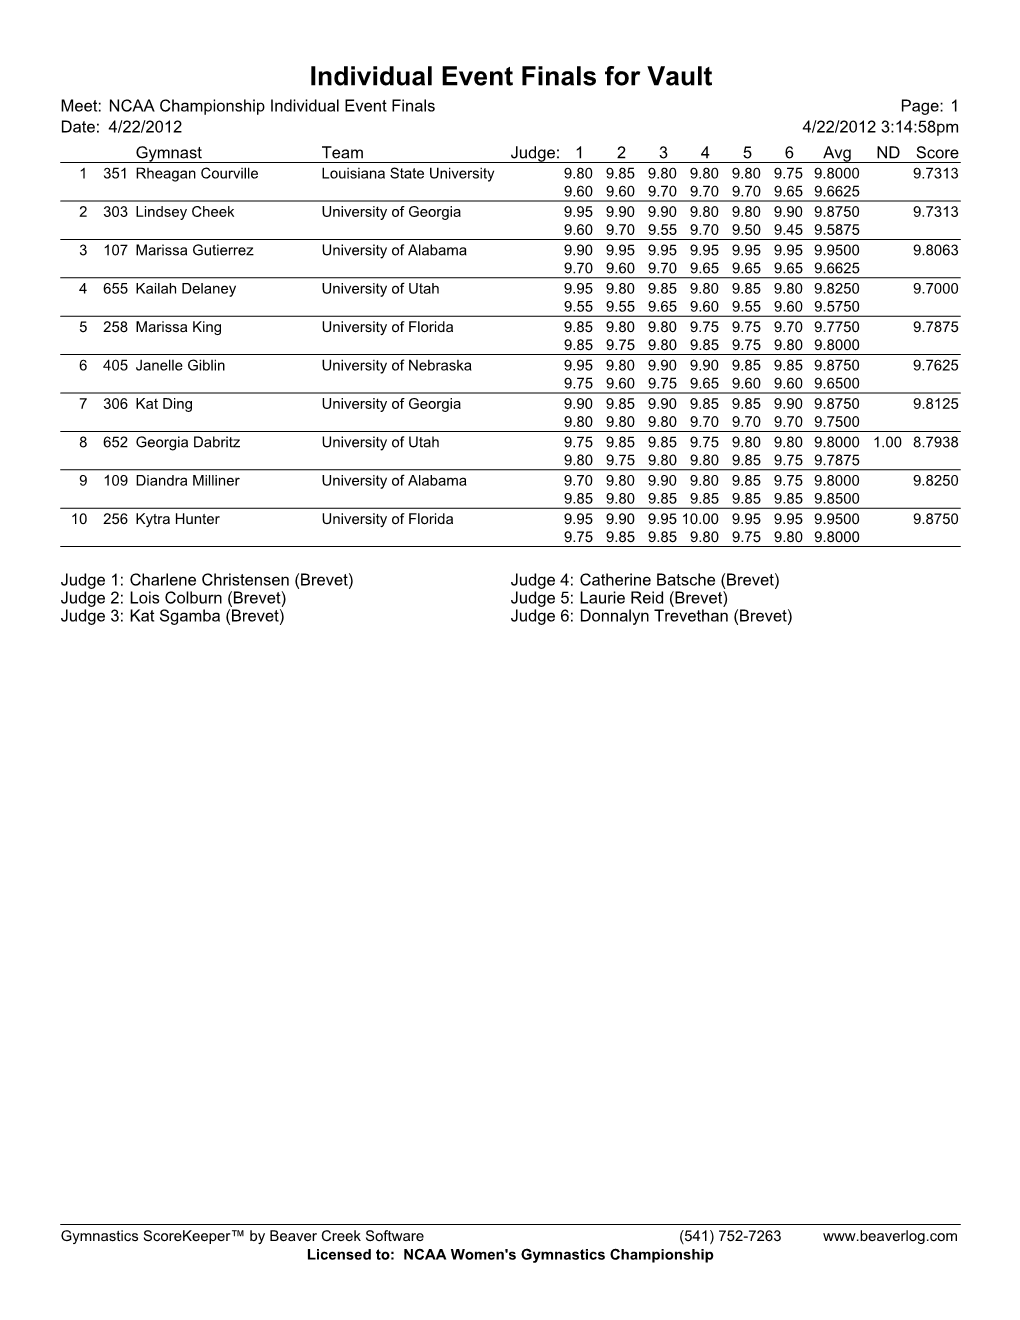 Individual Event Results